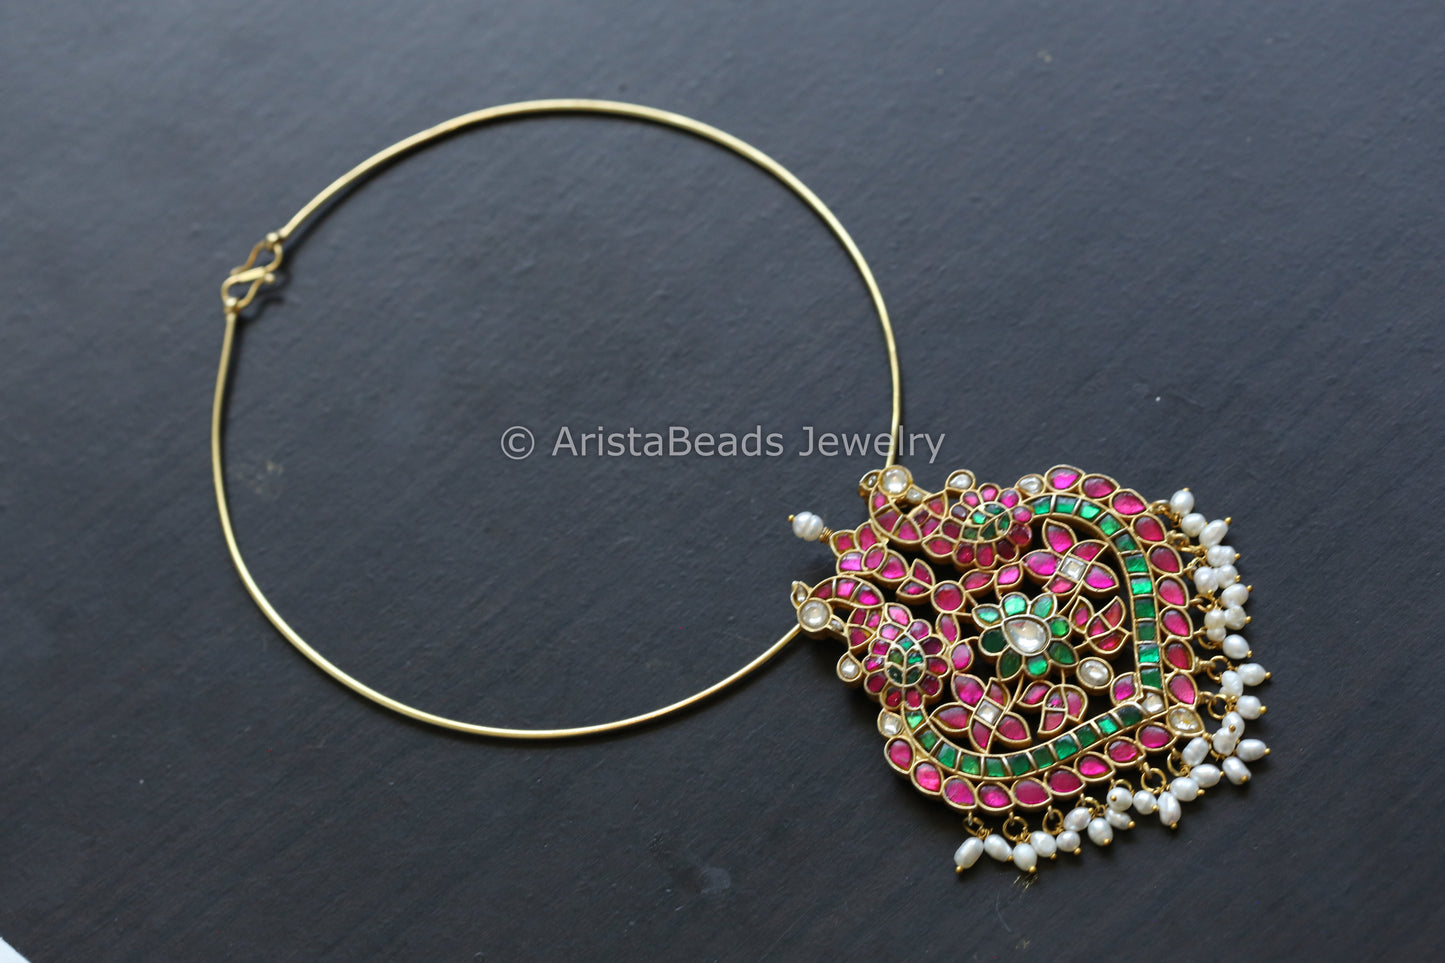 Real Jadau Hasli Necklace (Removable) - Ruby Green